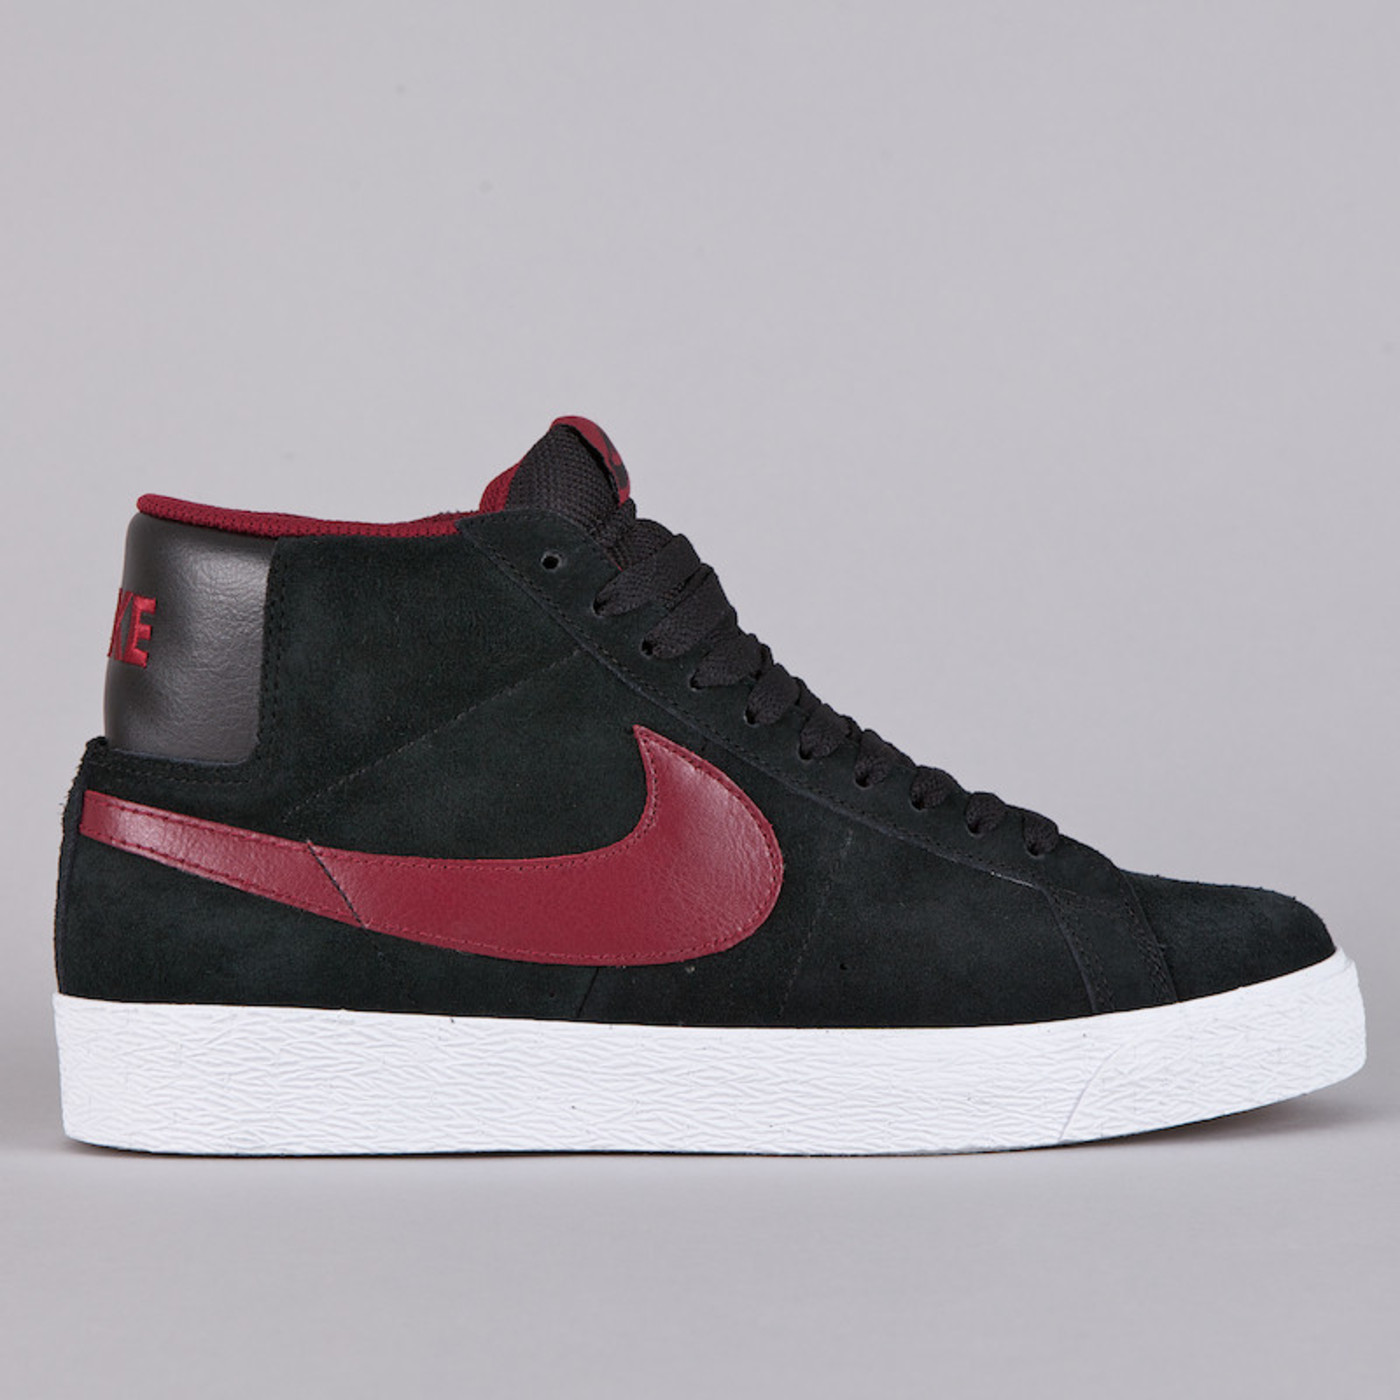 black nike with red swoosh